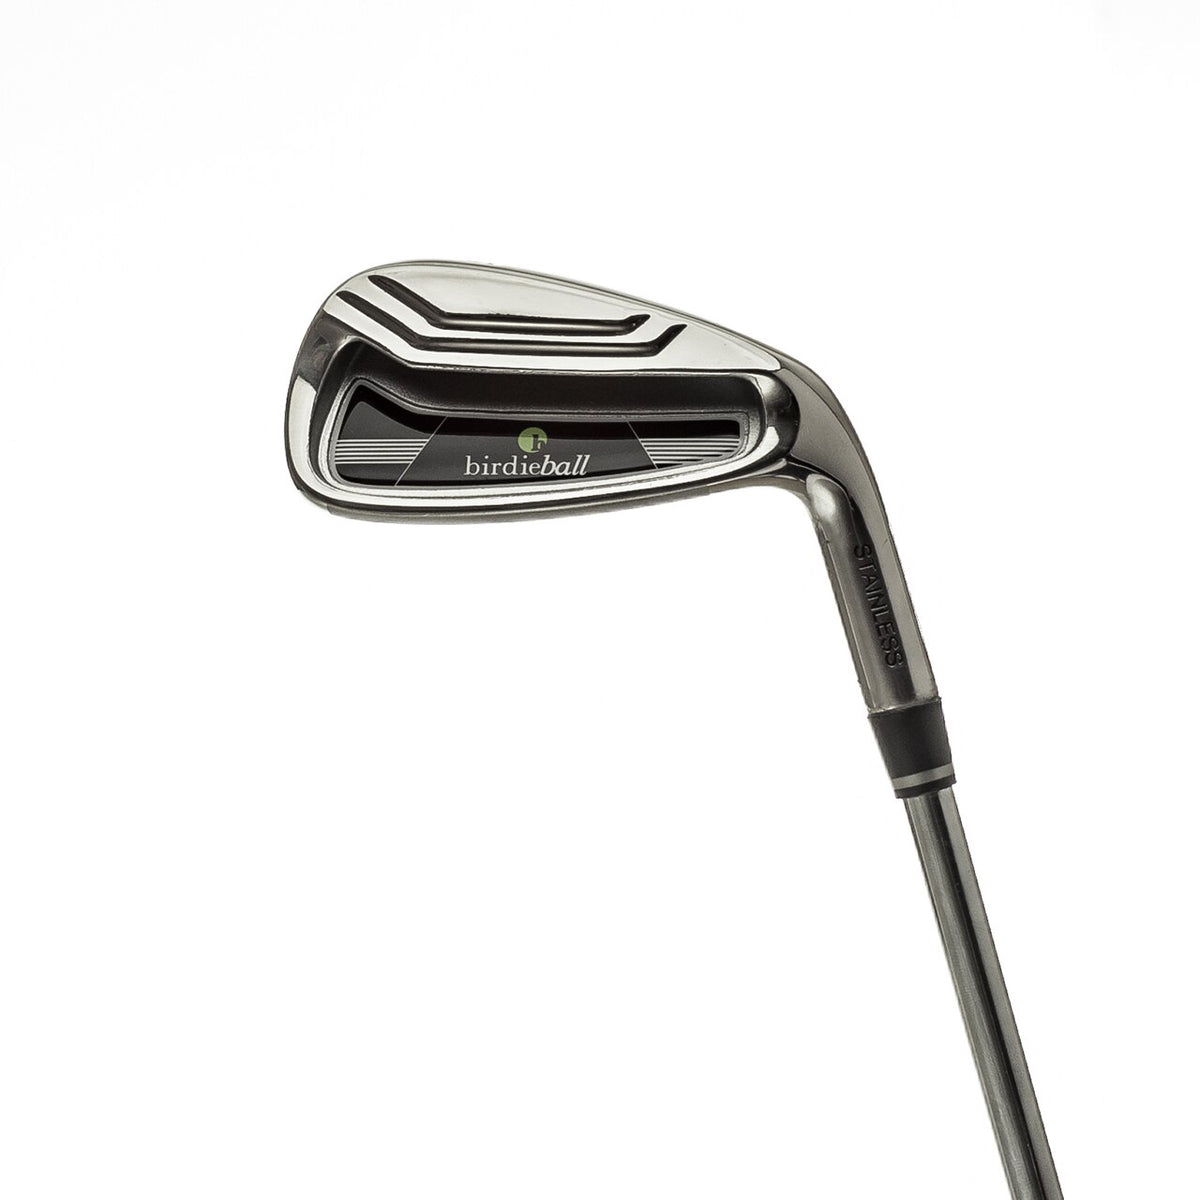 Telescoping/Collapsing Travel Club (7 Iron or Pitching Wedge)